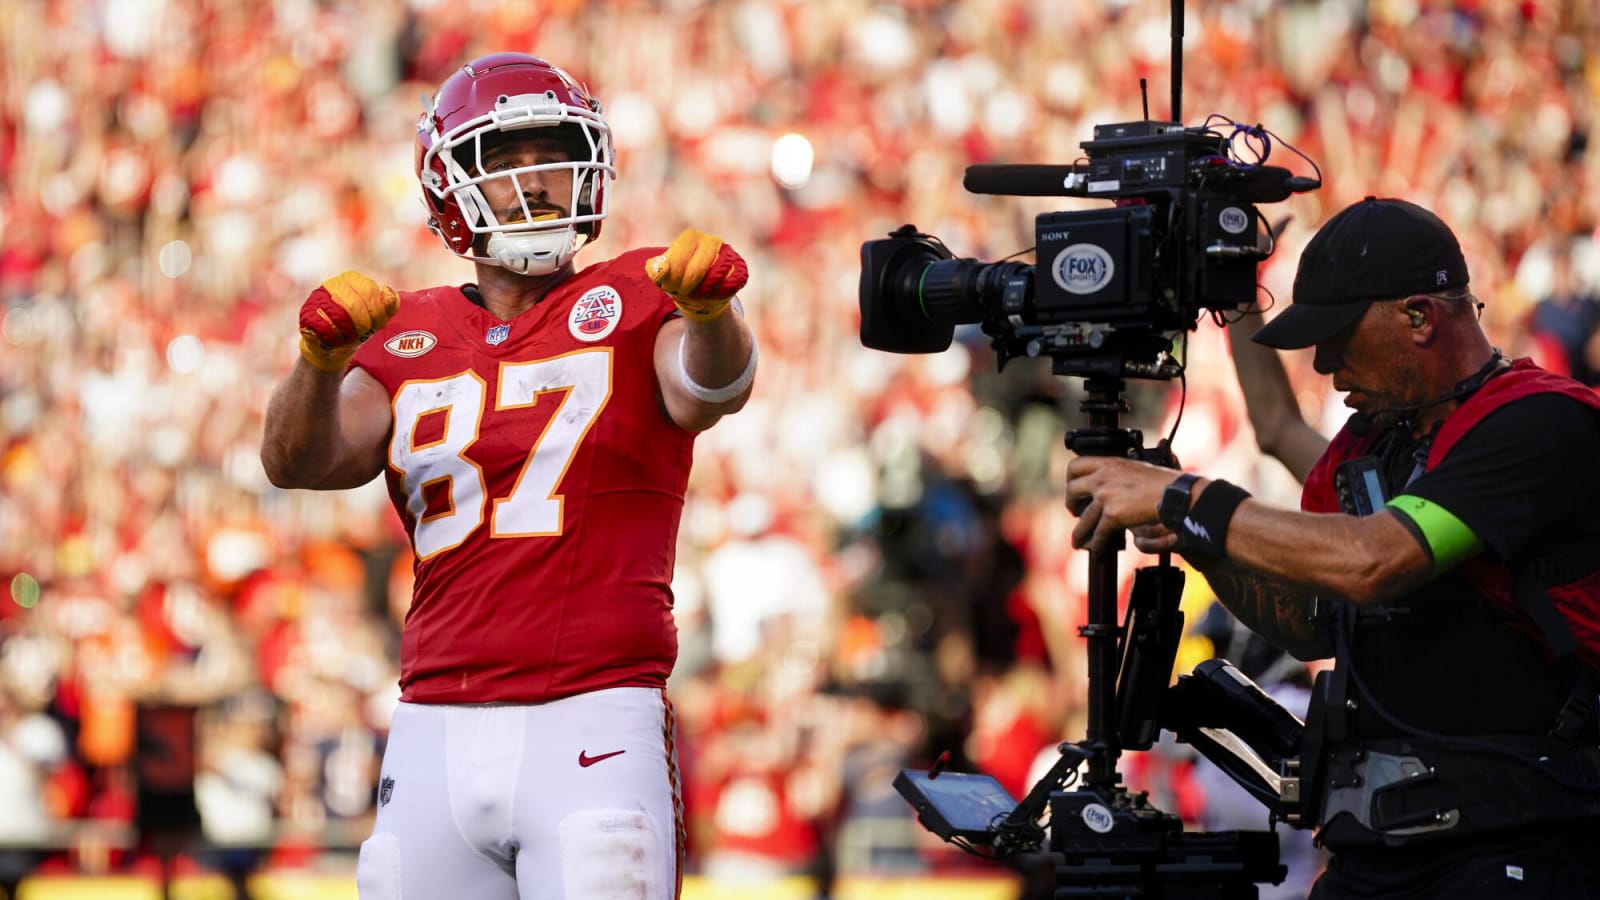 NFL 'SNF' Week 4: Best bets and preview for Jets vs. Chiefs